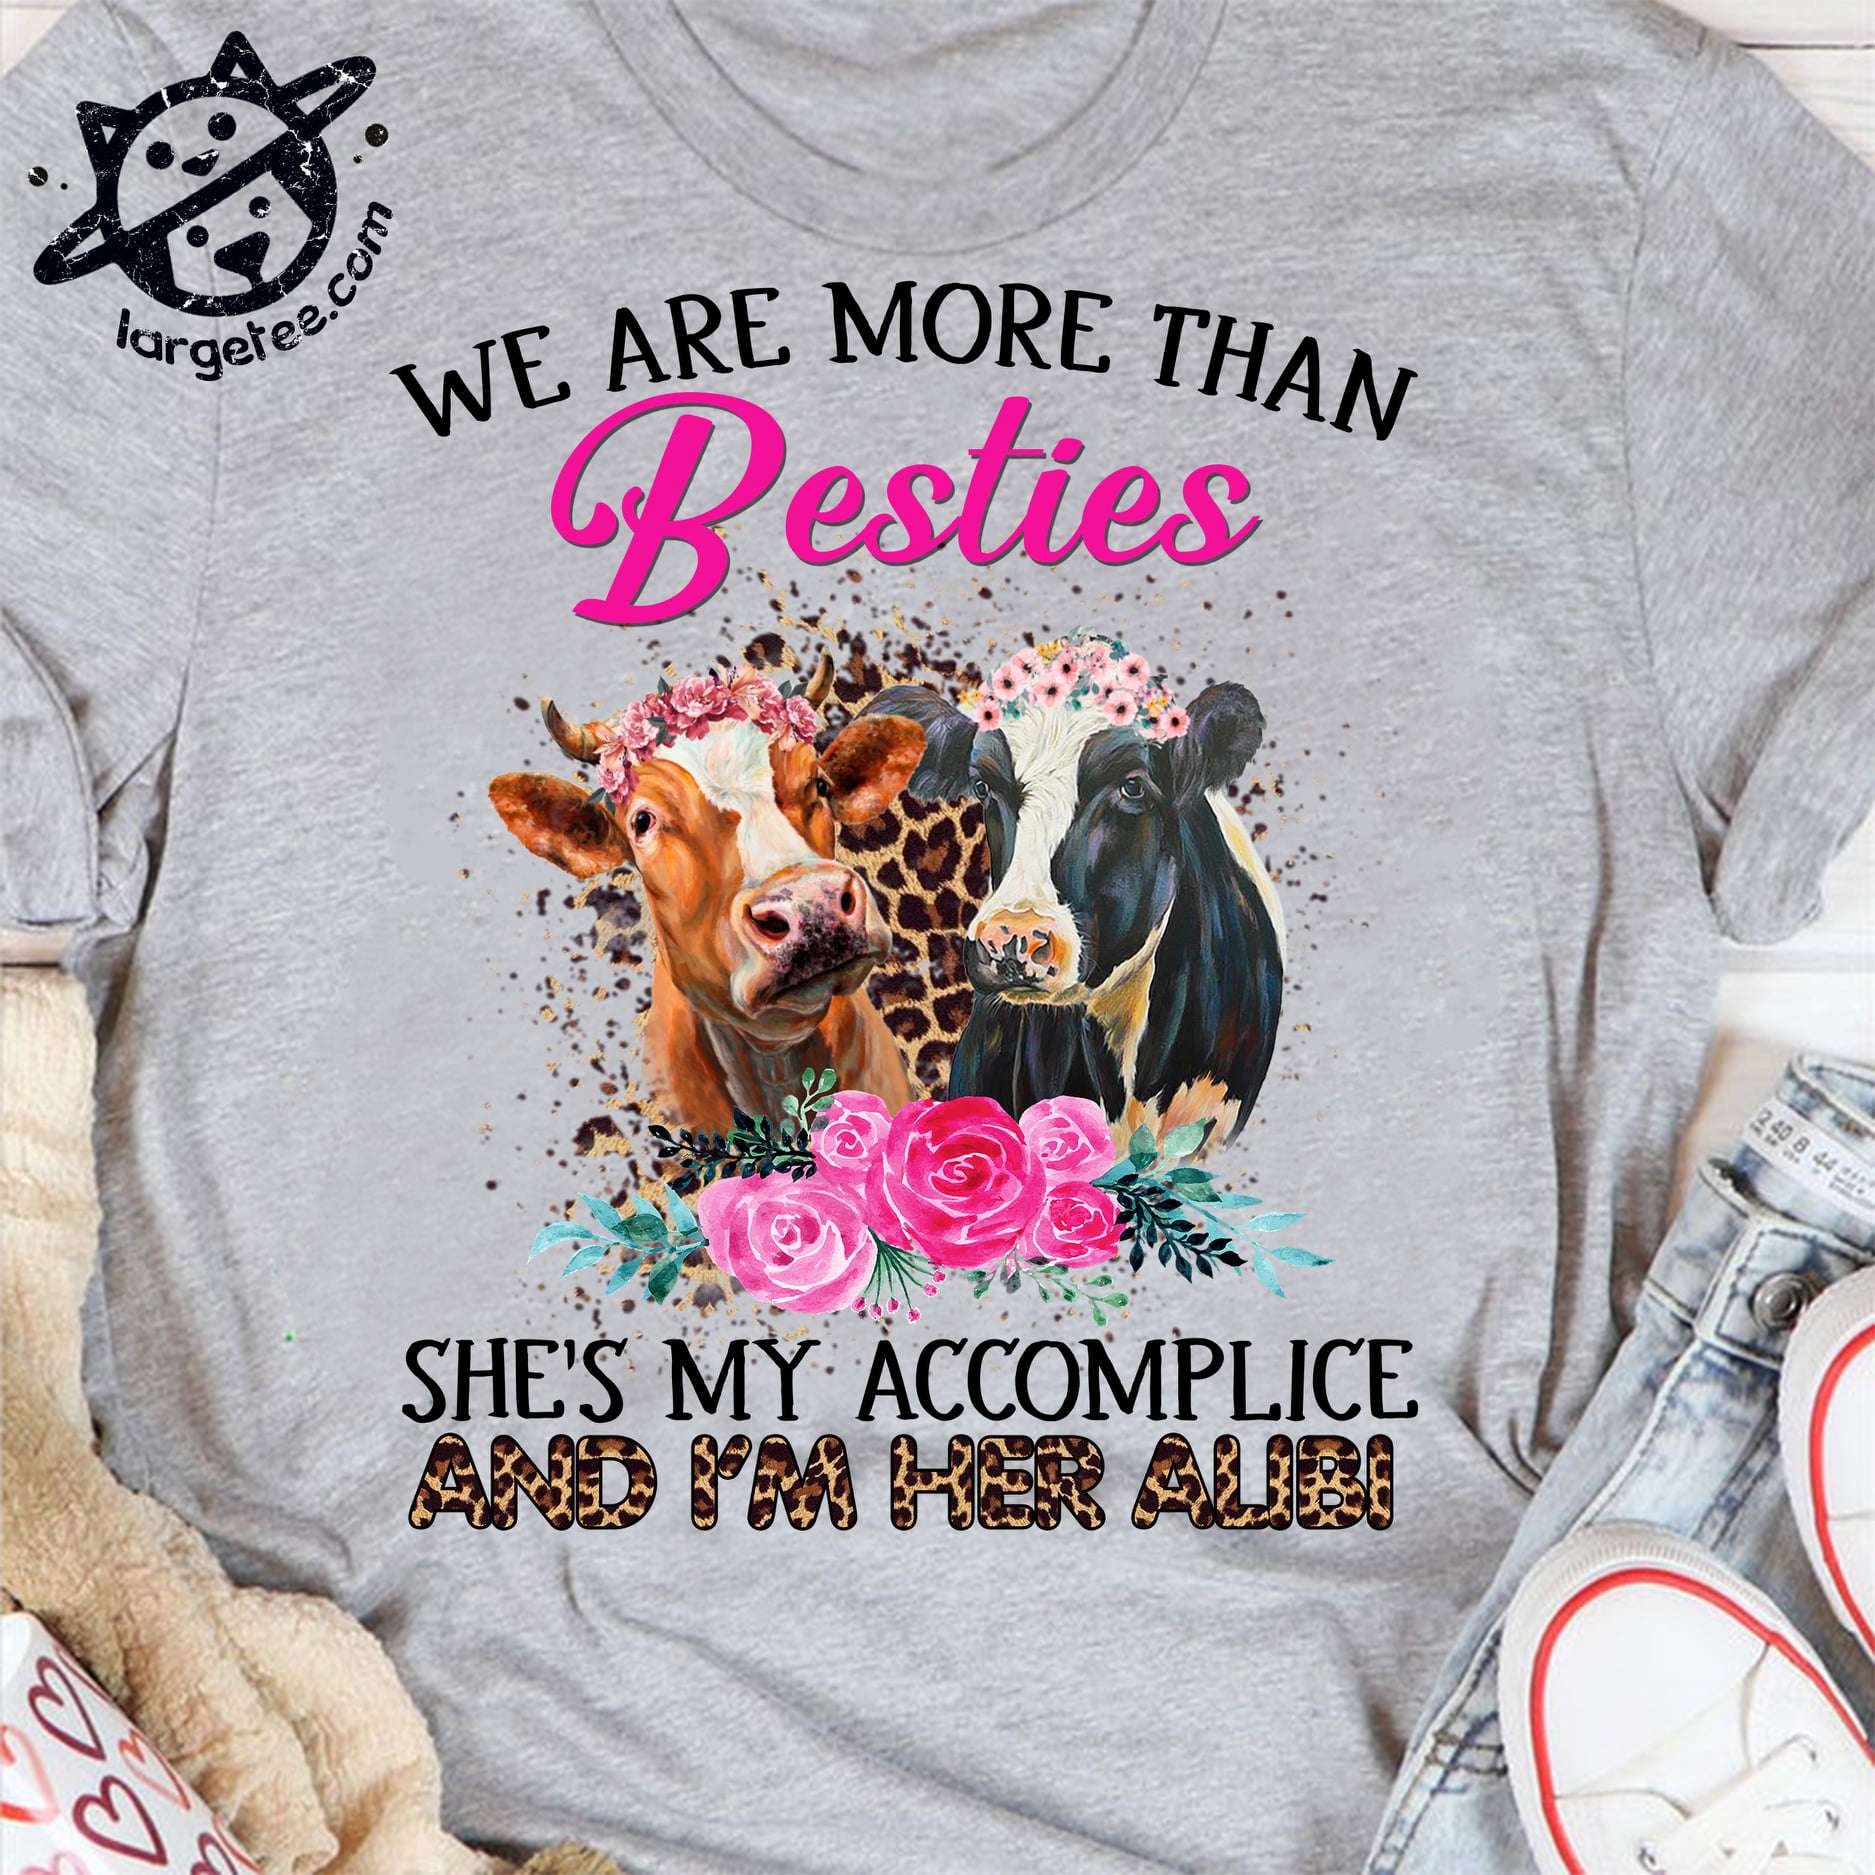 Flower Cows - We are more than besties she's my accomplice and i'm her alibi